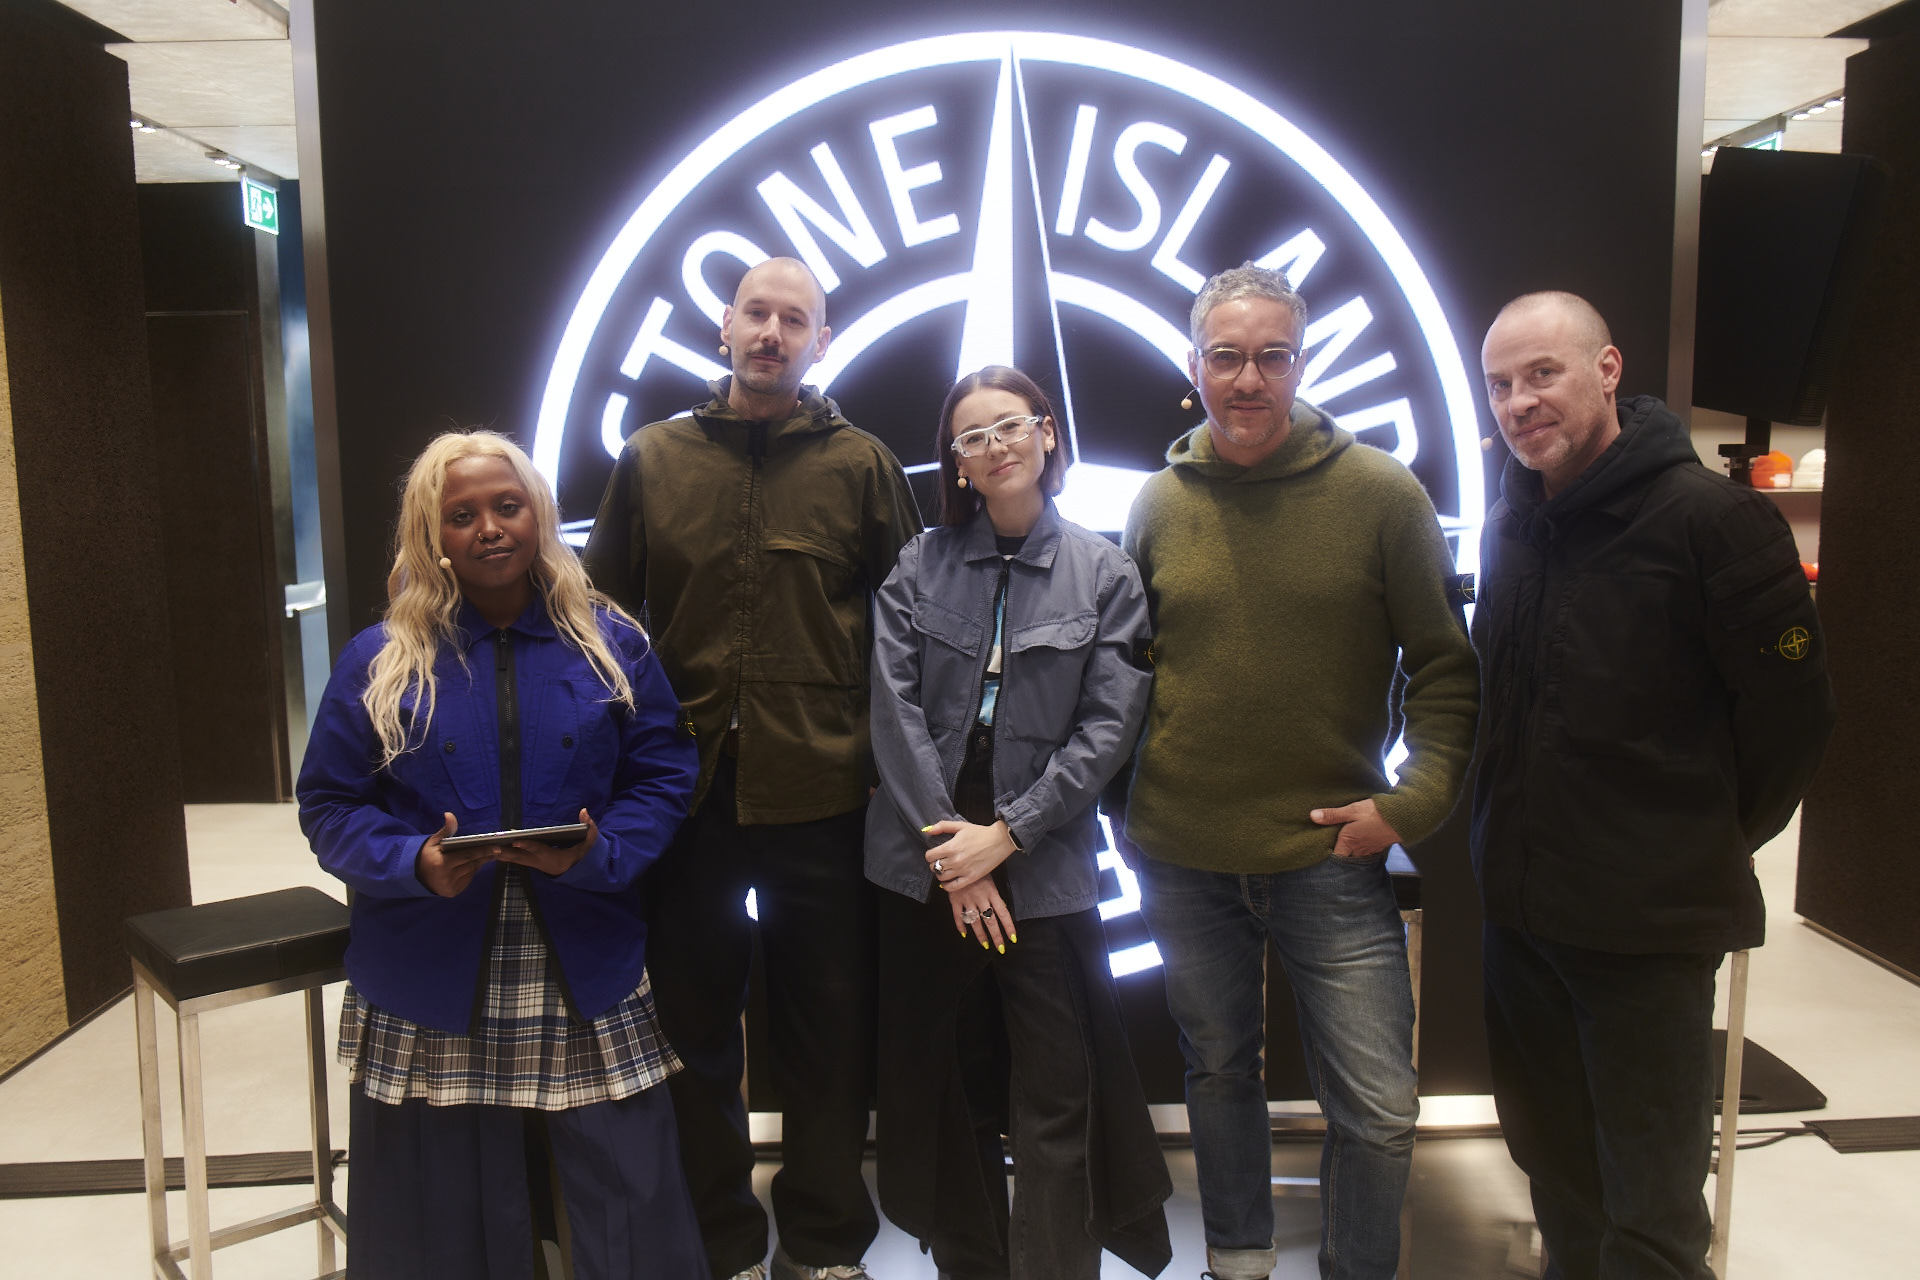 Stone Island’s Cultural Canvas From Their Munich Panel Talk